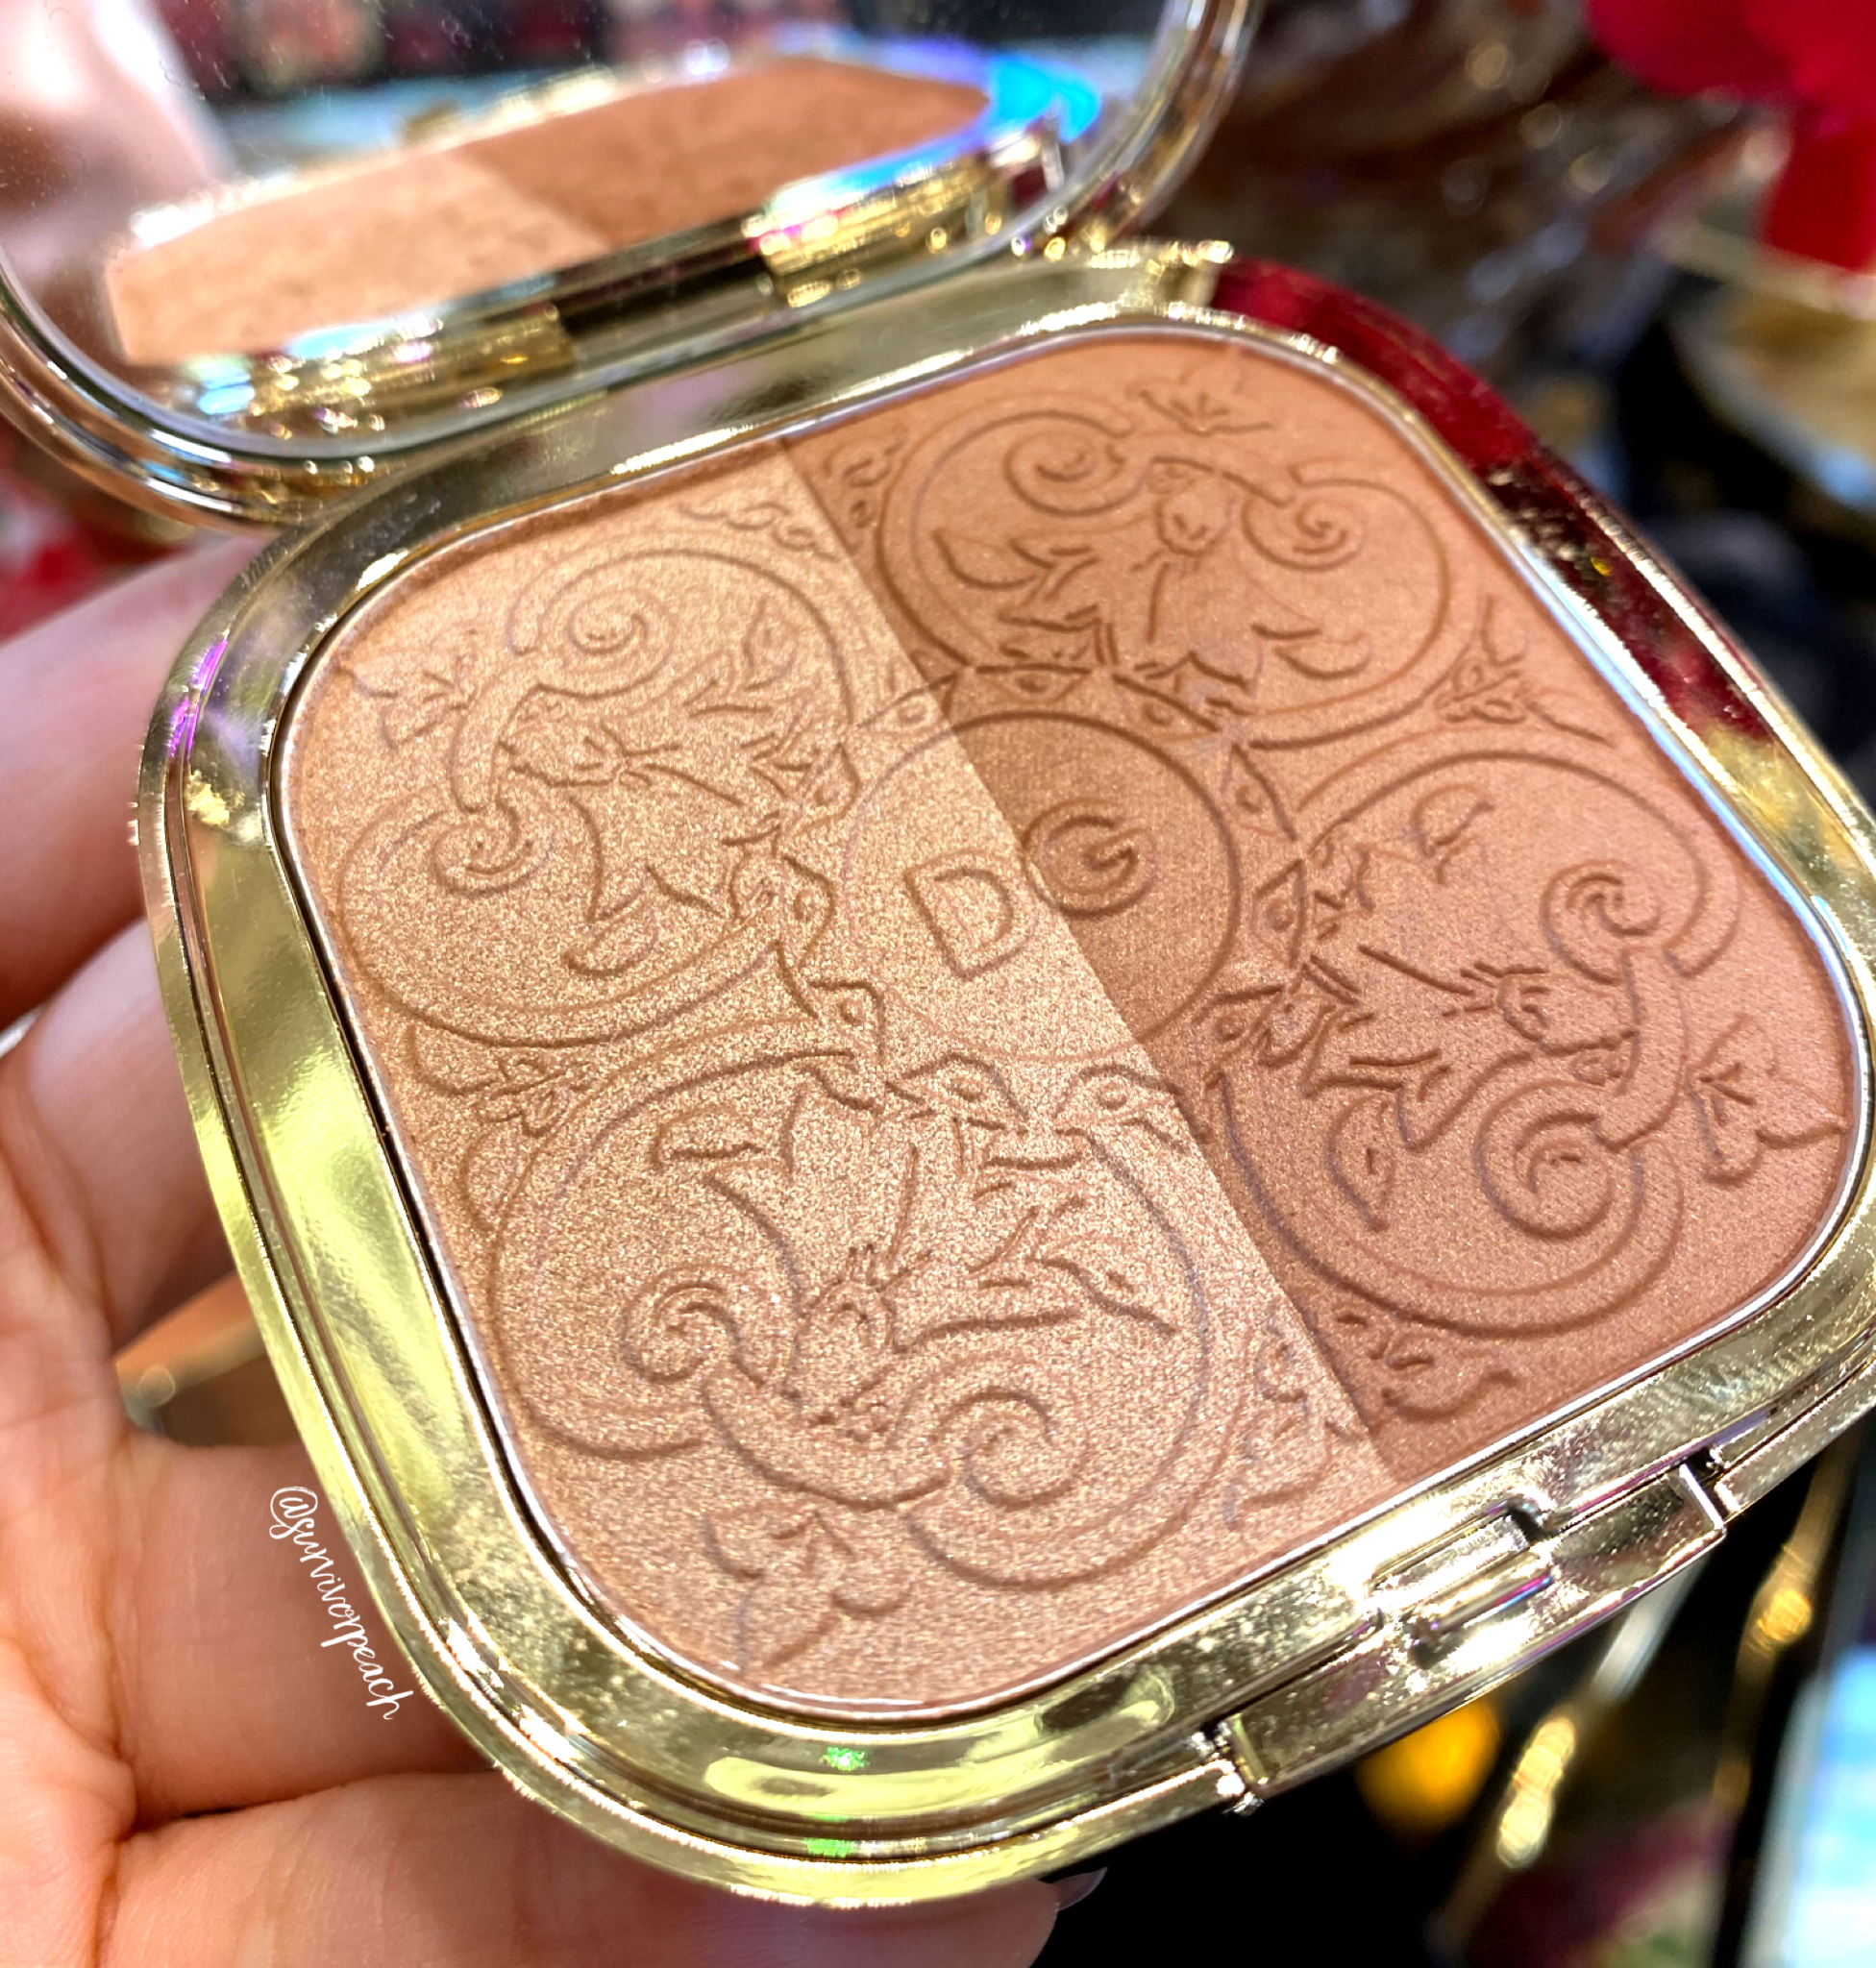 Gabbana Beauty Solar Glow Illuminating Powder Duo Review and Swatches & D&G the Love Collector Limited Edition Highlighter — Survivorpeach